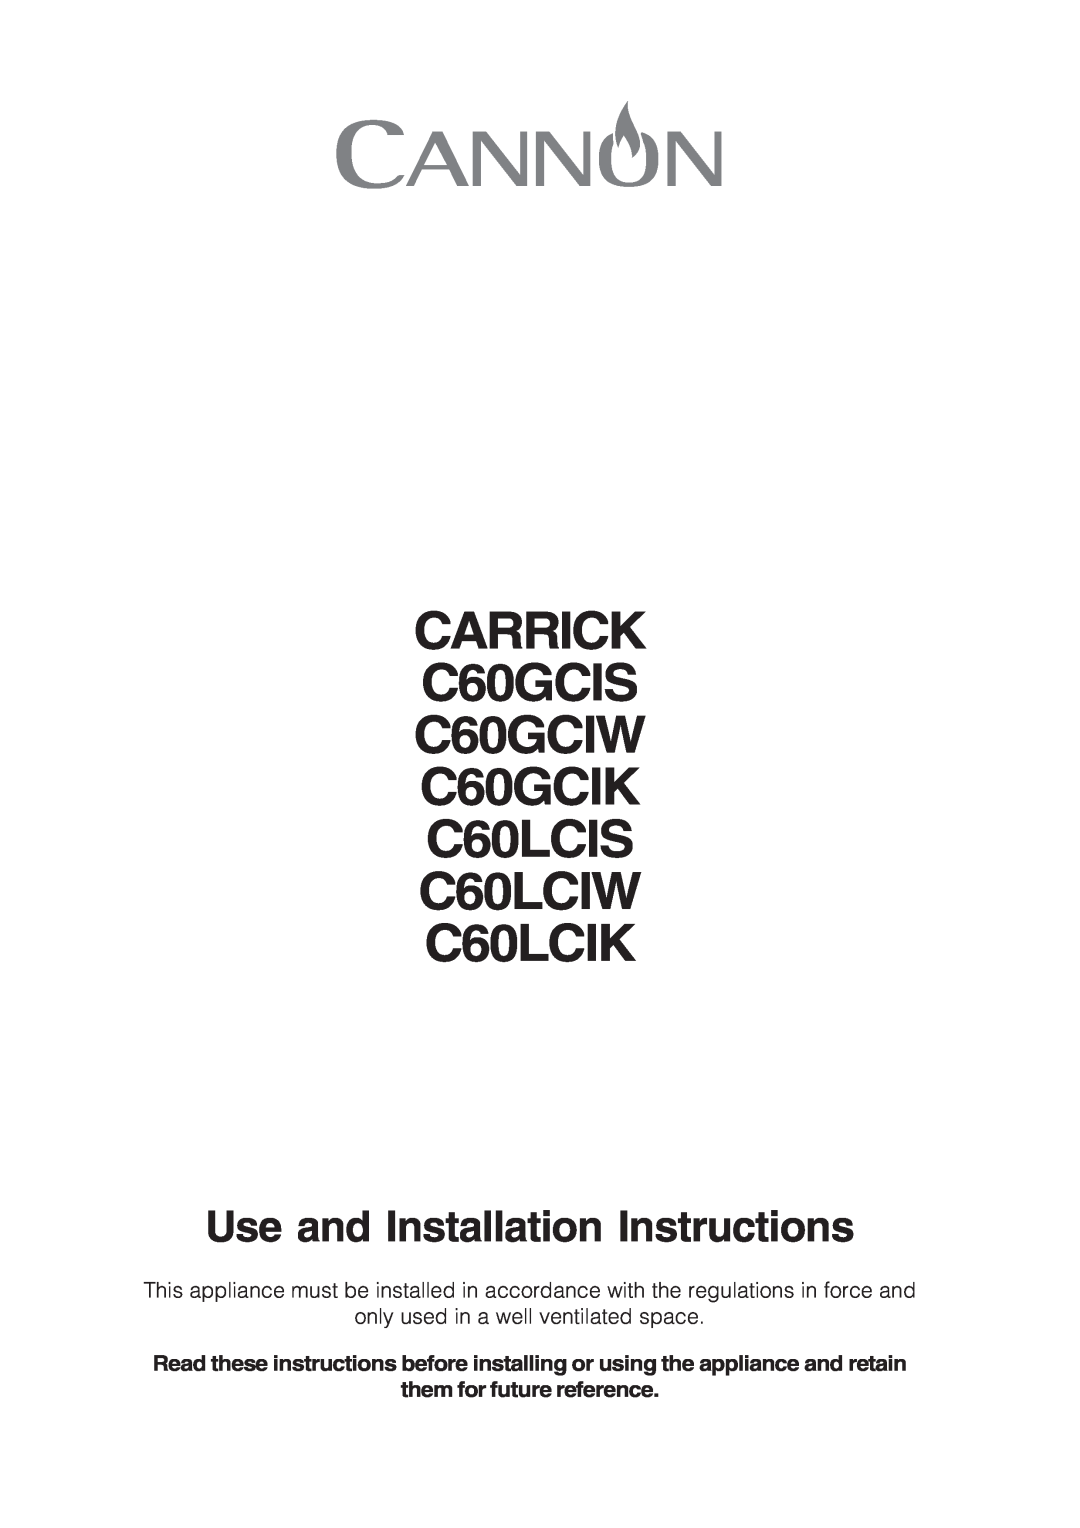 Cannon installation instructions CARRICK C60GCIS C60GCIW C60GCIK C60LCIS C60LCIW C60LCIK, them for future reference 